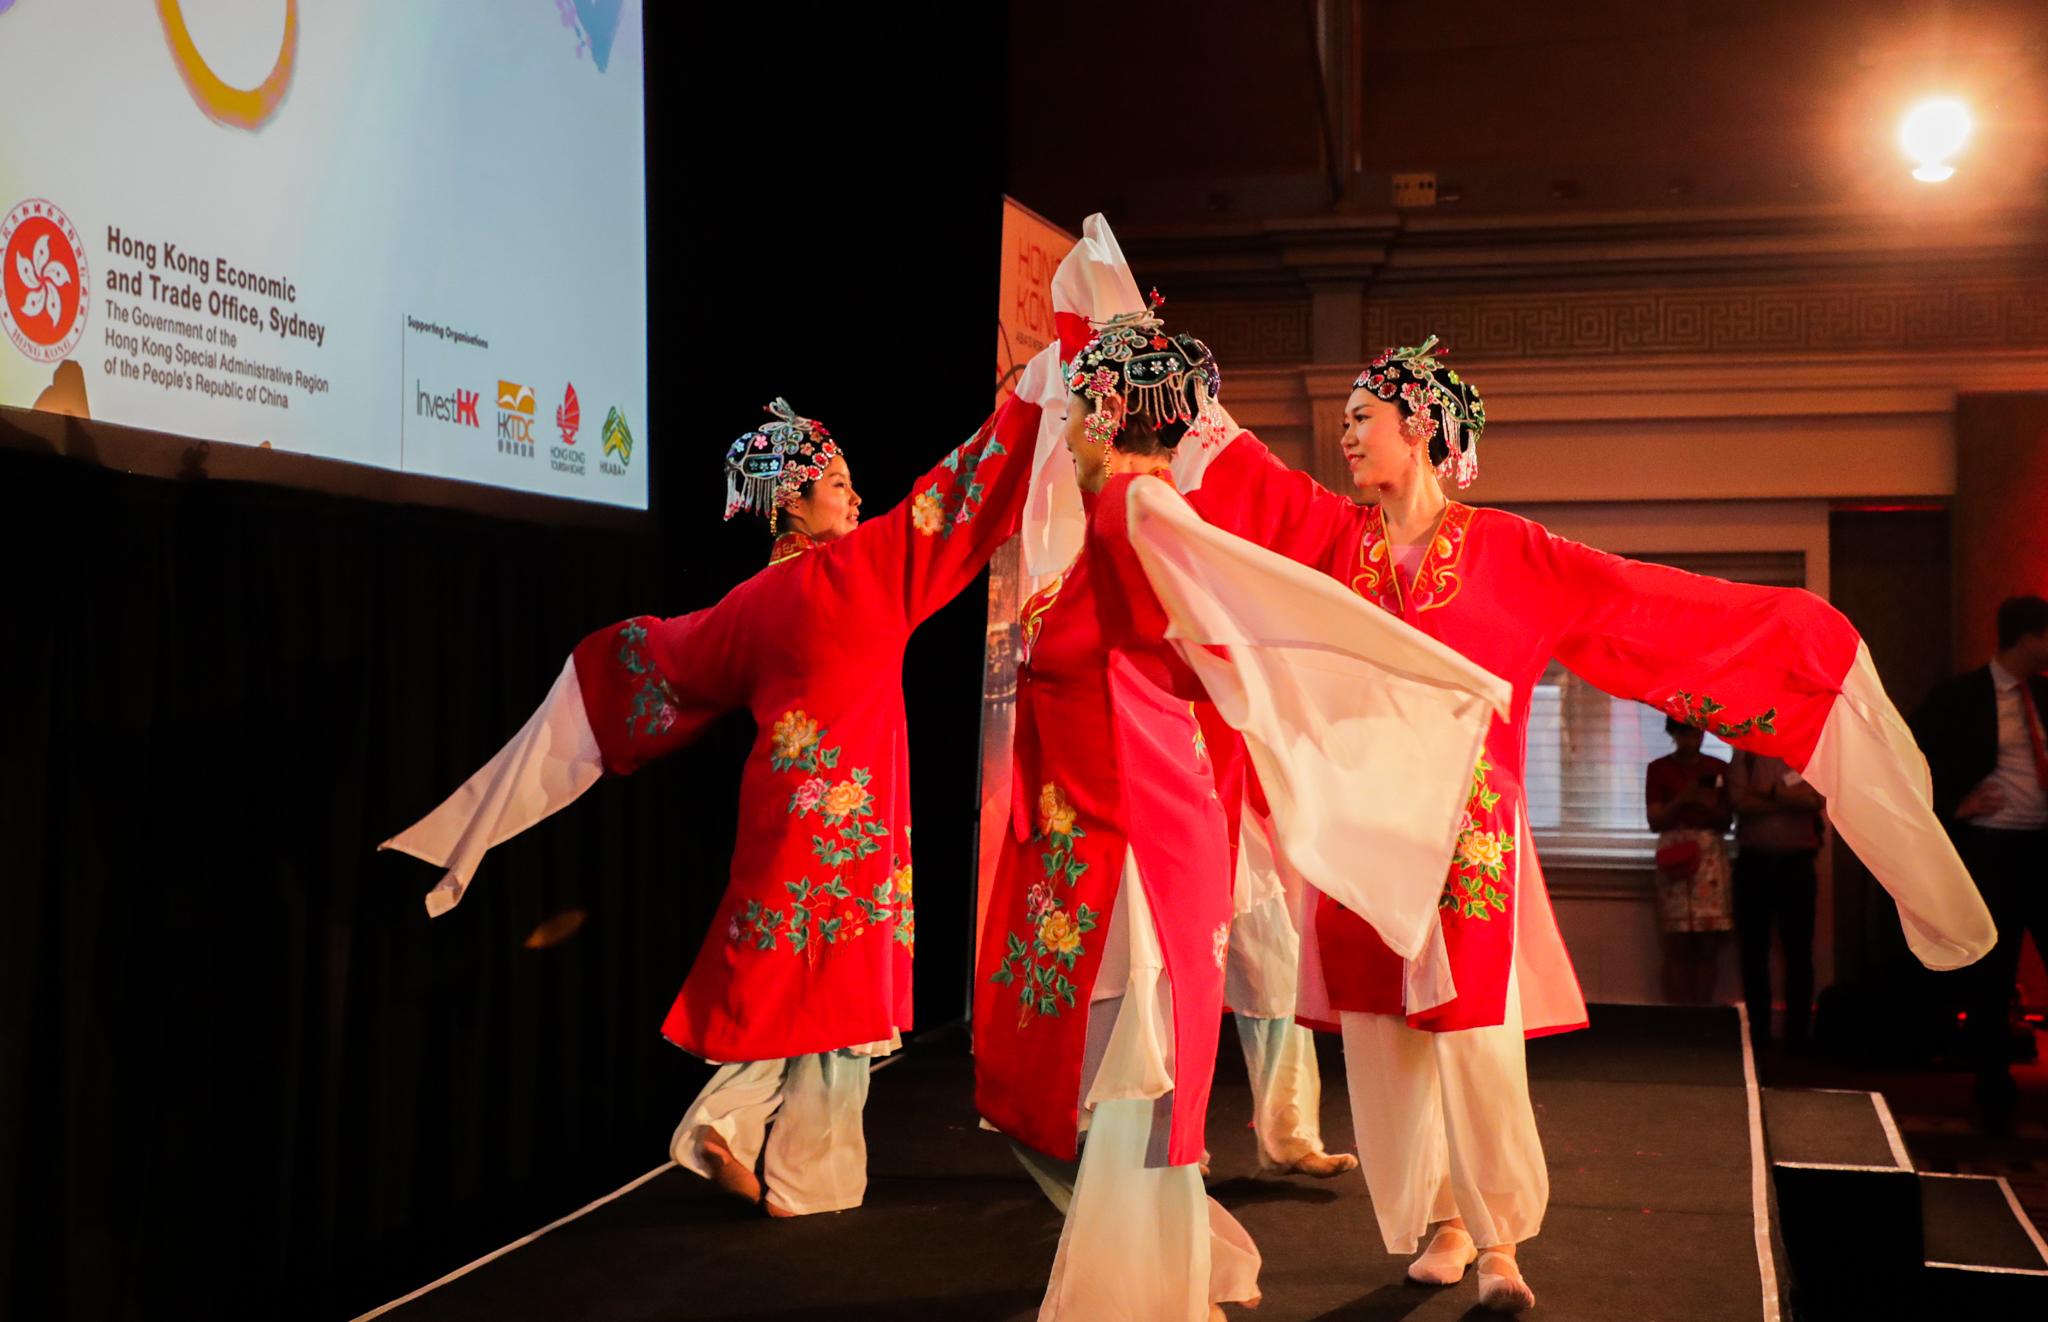 The Hong Kong Economic and Trade Office, Sydney hosted a reception in Sydney, Australia, today (February 7) to celebrate the Year of the Rabbit. Photo shows a Chinese dance performance at the reception.